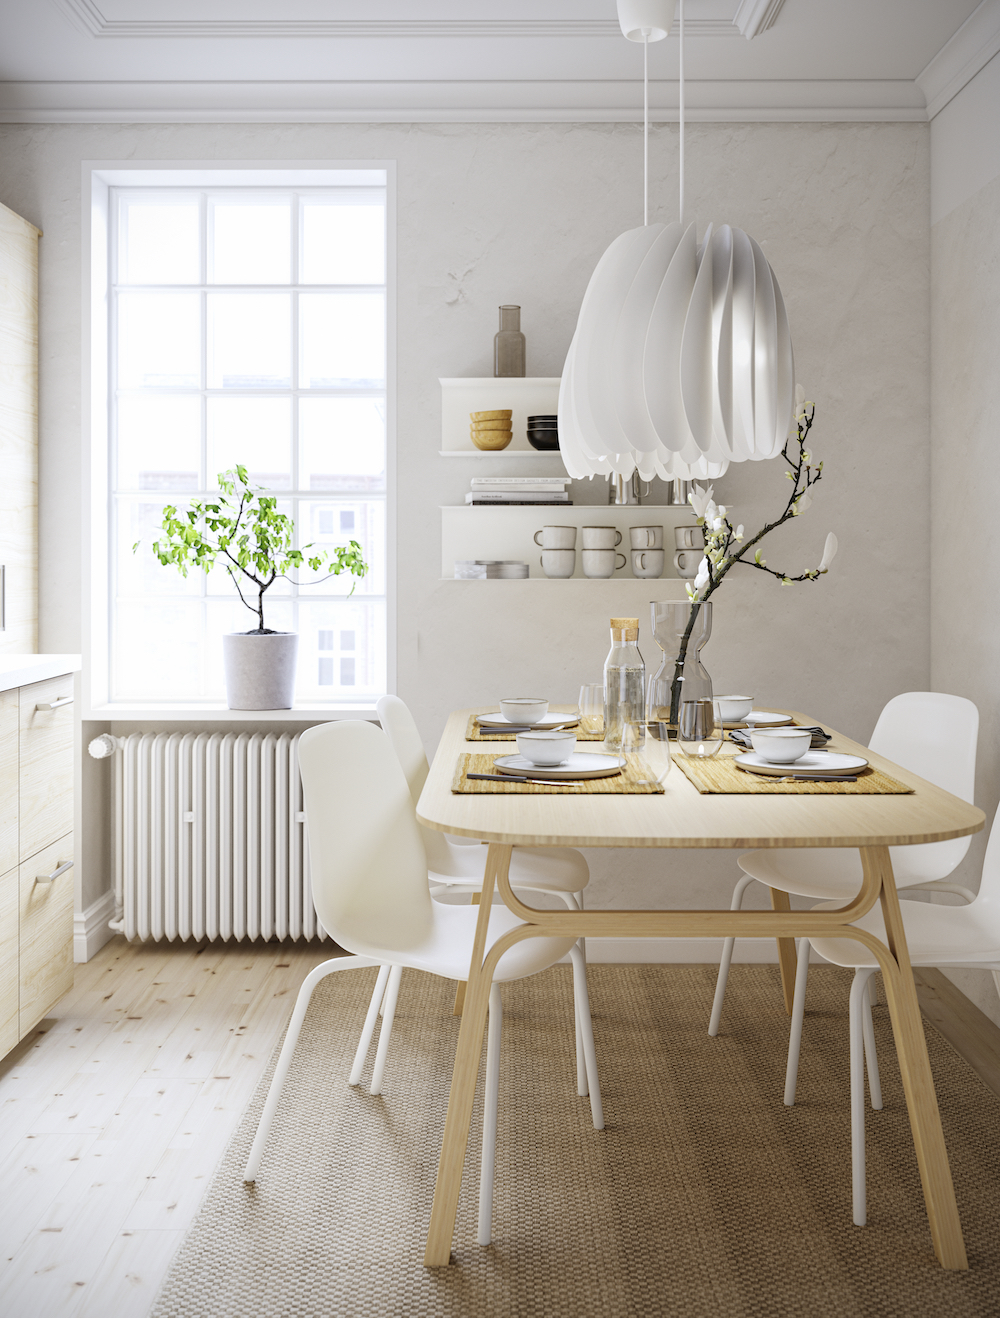 IKEA birch dining table with four white chairs in kitchen